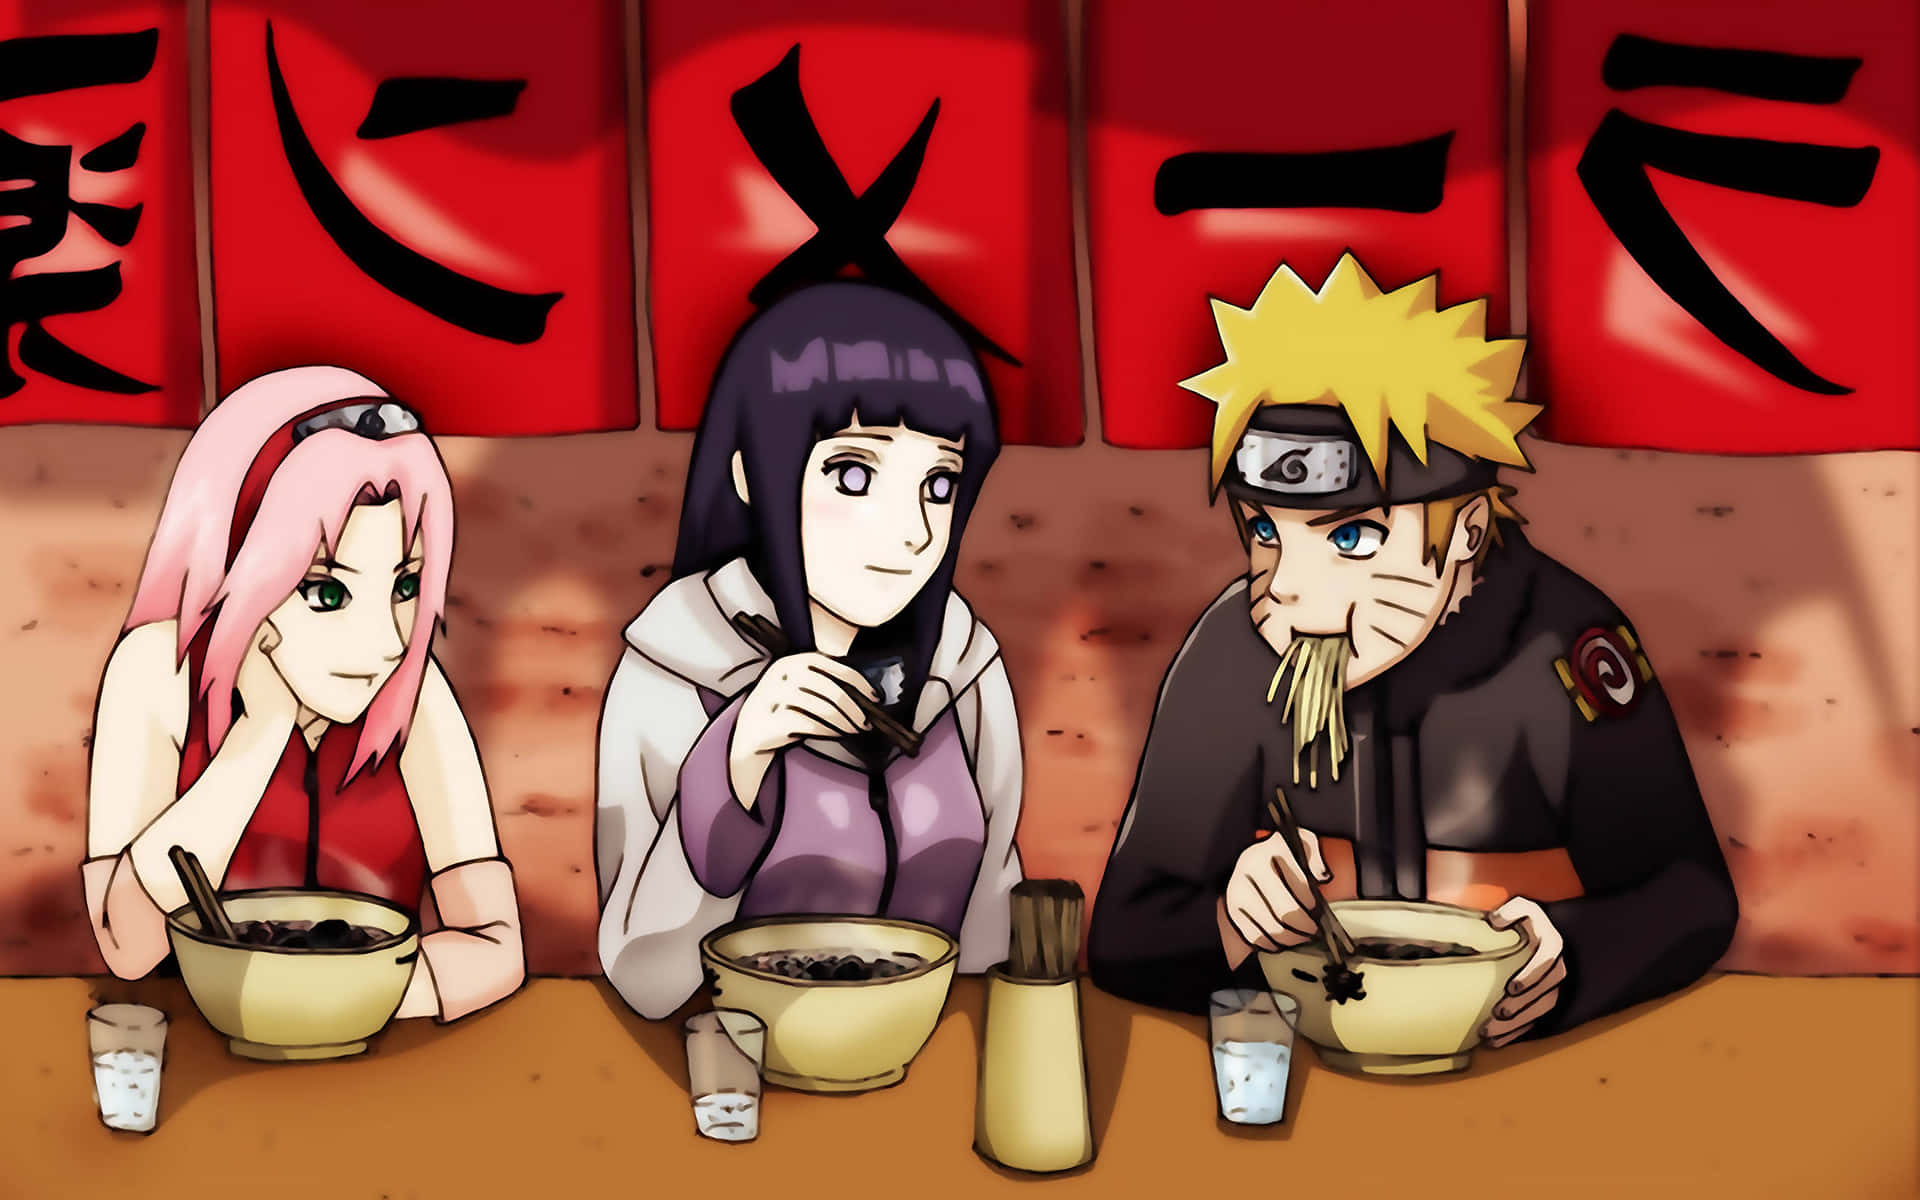 Enjoy a bowl of "Naruto Ramen" – the delectable ramen dish inspired by one of the greatest Anime shows. Wallpaper